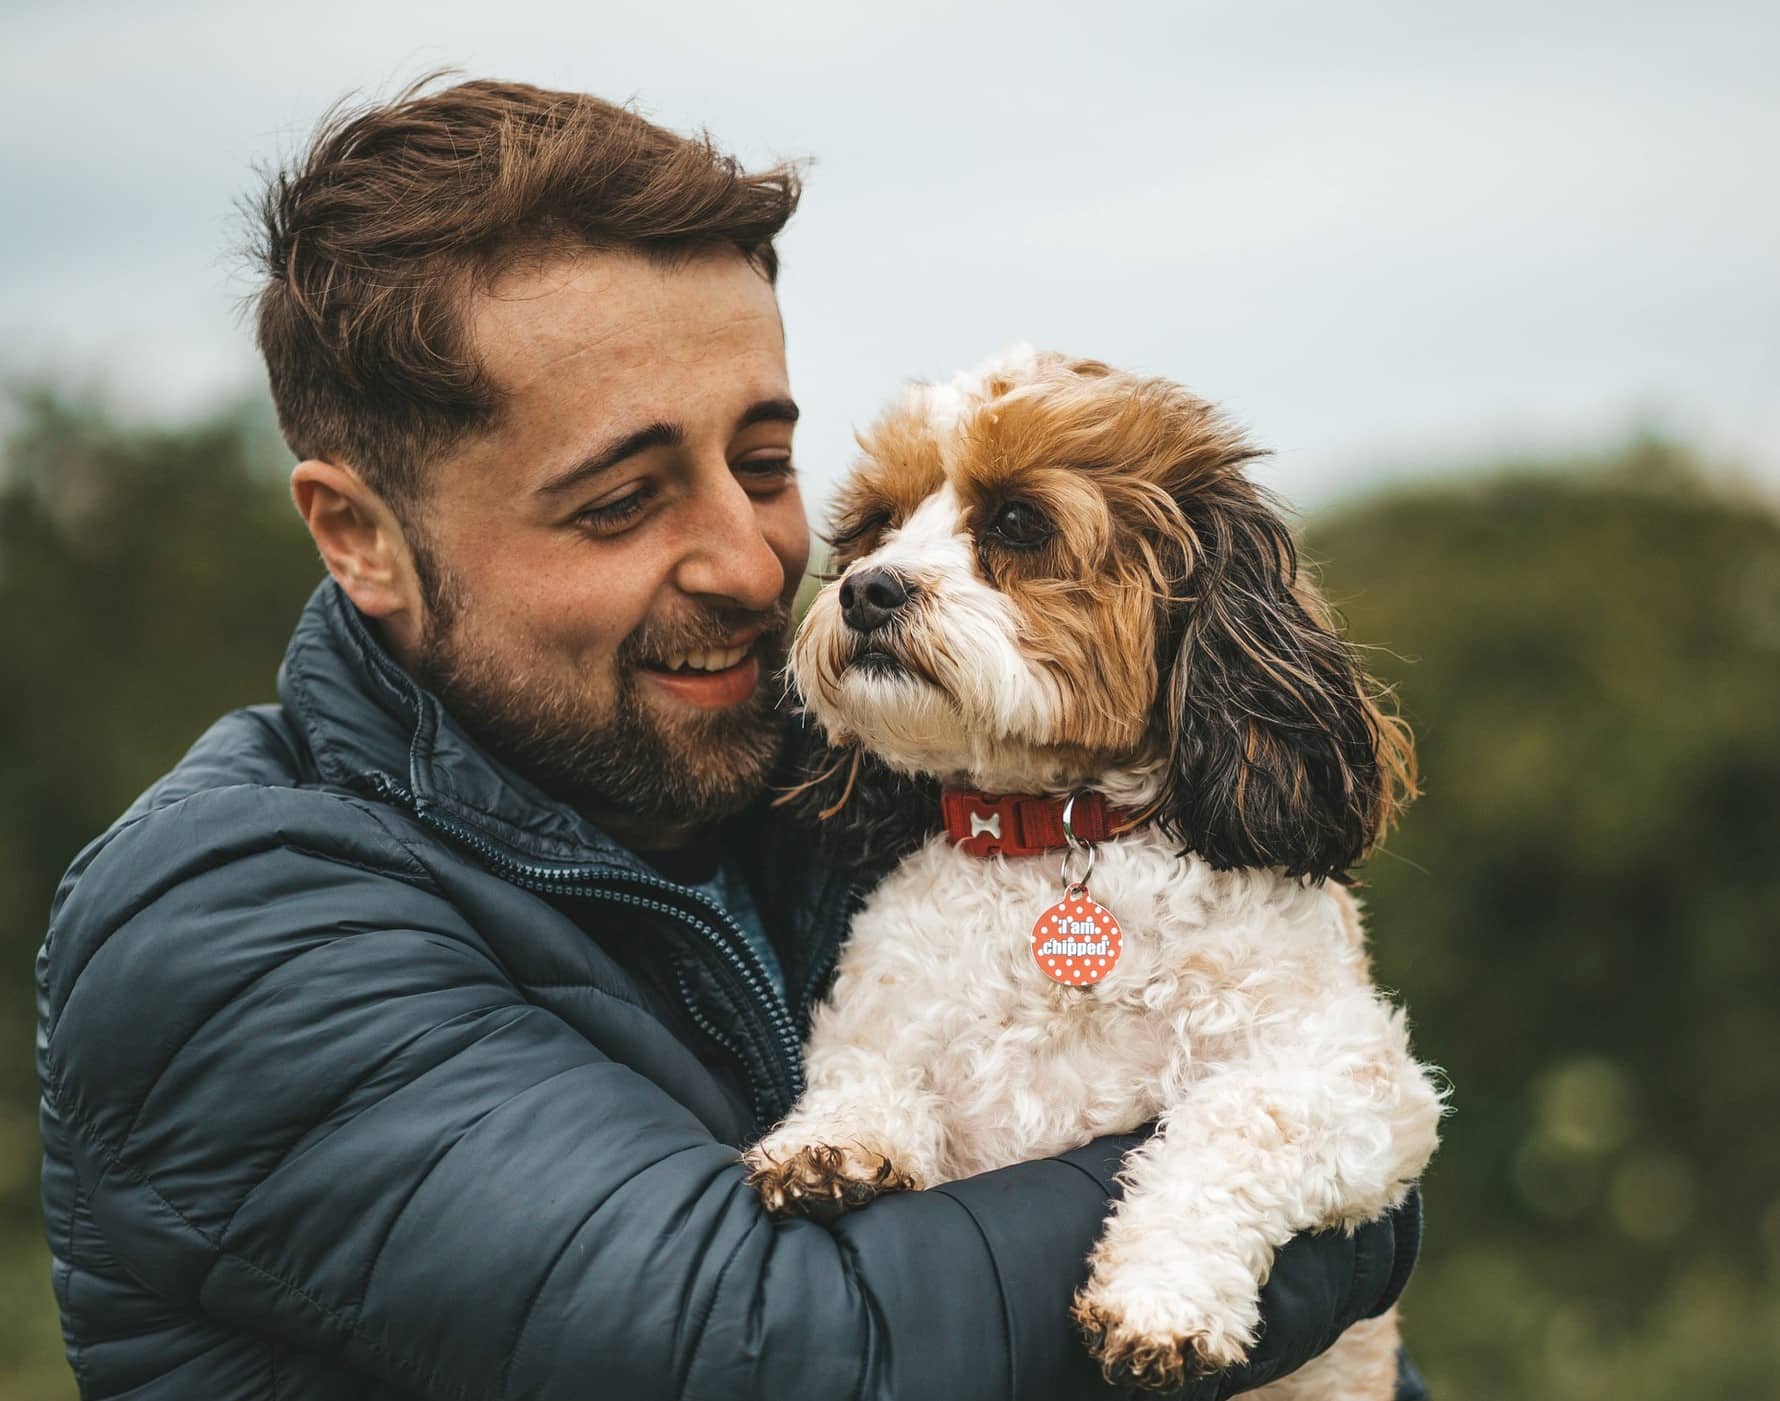 A man holds his fluffy dog affectionately and wonders what pet health conditions he can safeguard it from according to its breed